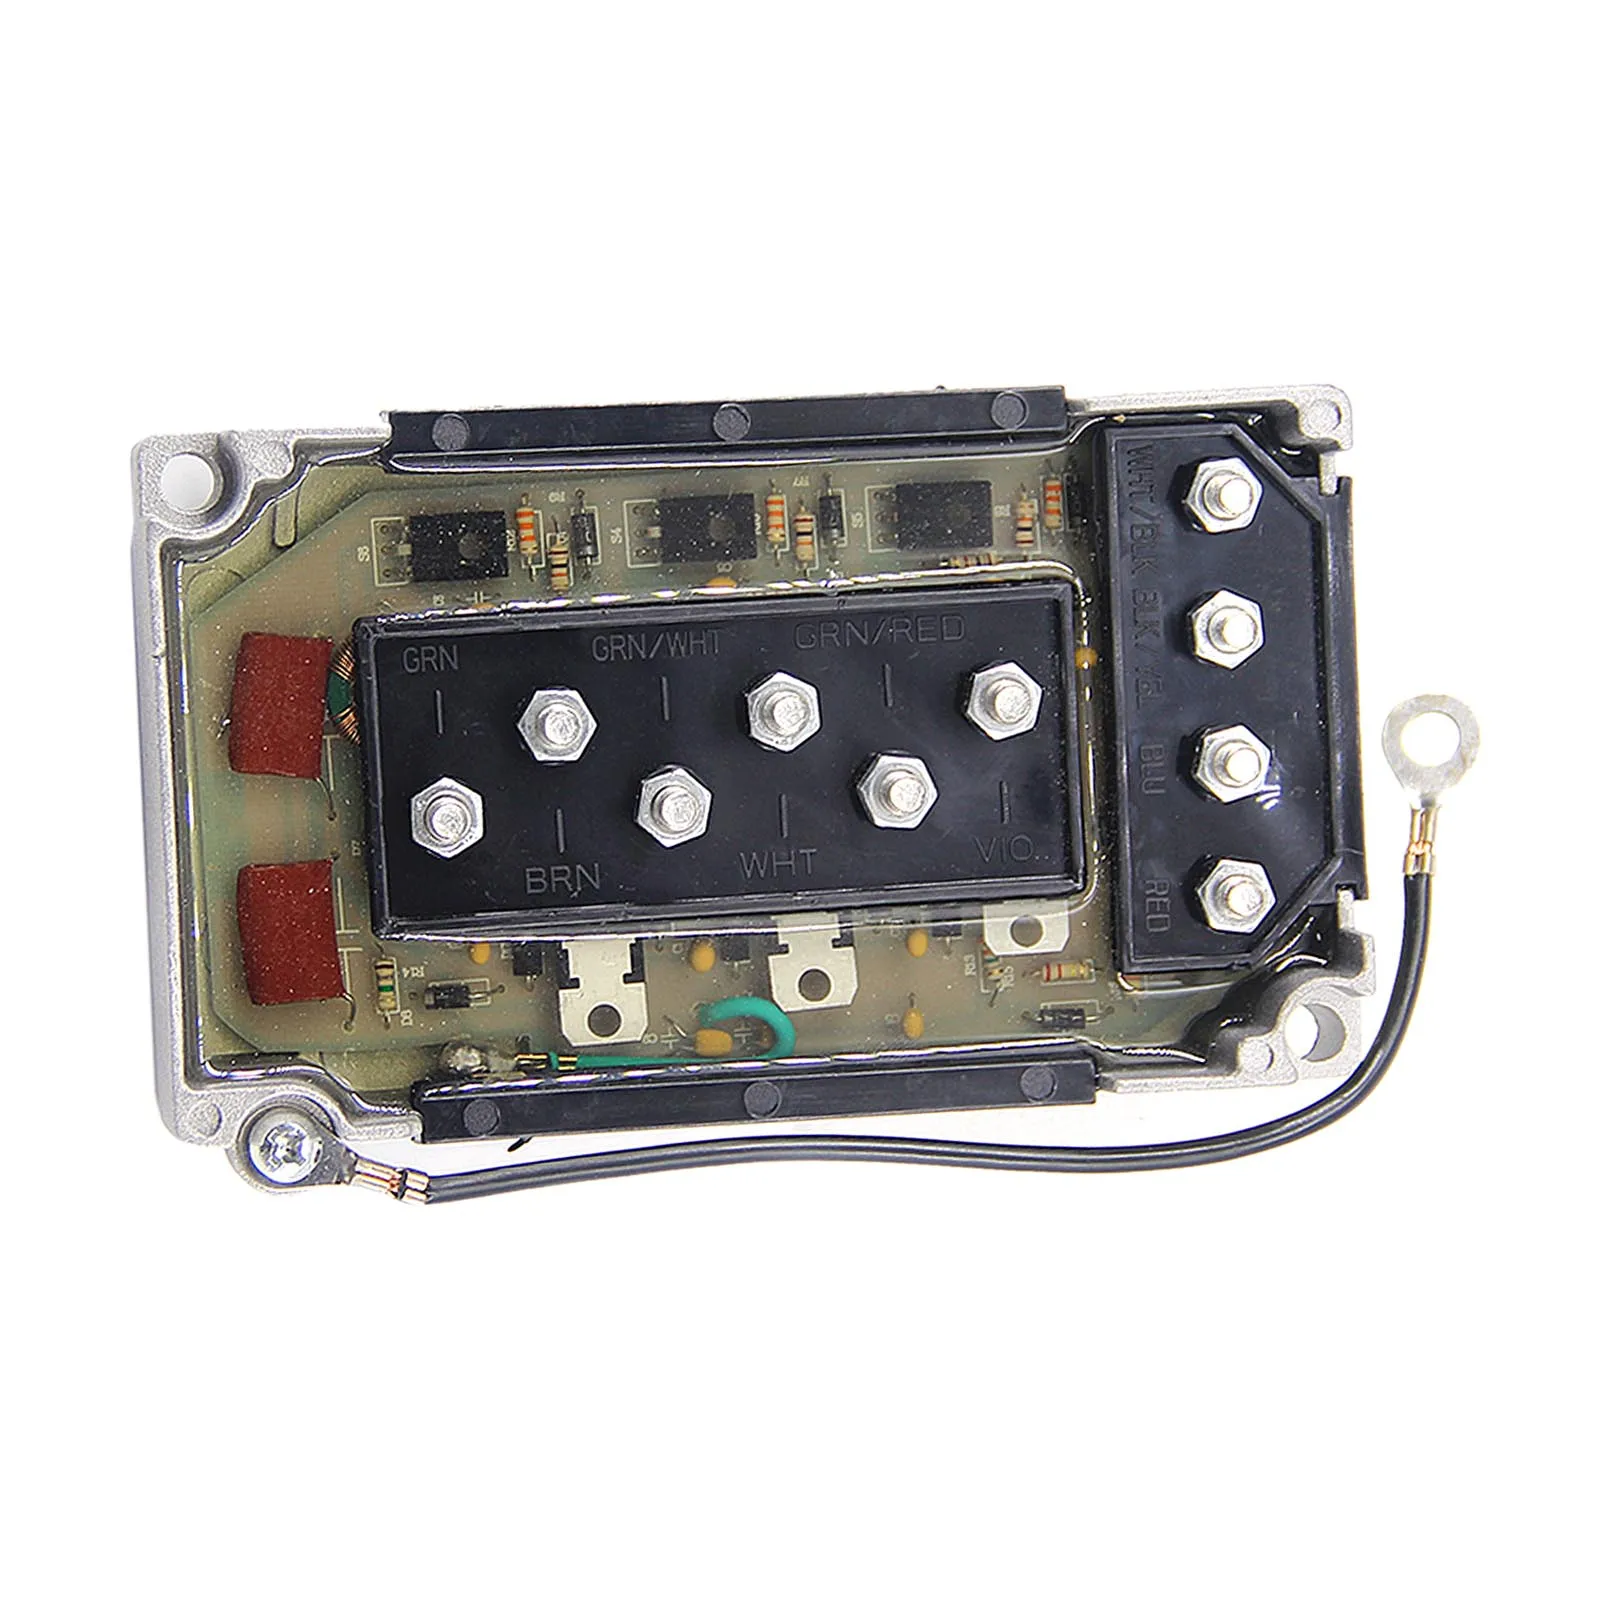 CDI Switch Box for Mercury 50-275 HP Outboard Motor Power Pack 332-7778A12 332-7778A6 332-7778A3 332-5524A1 332-7778A7